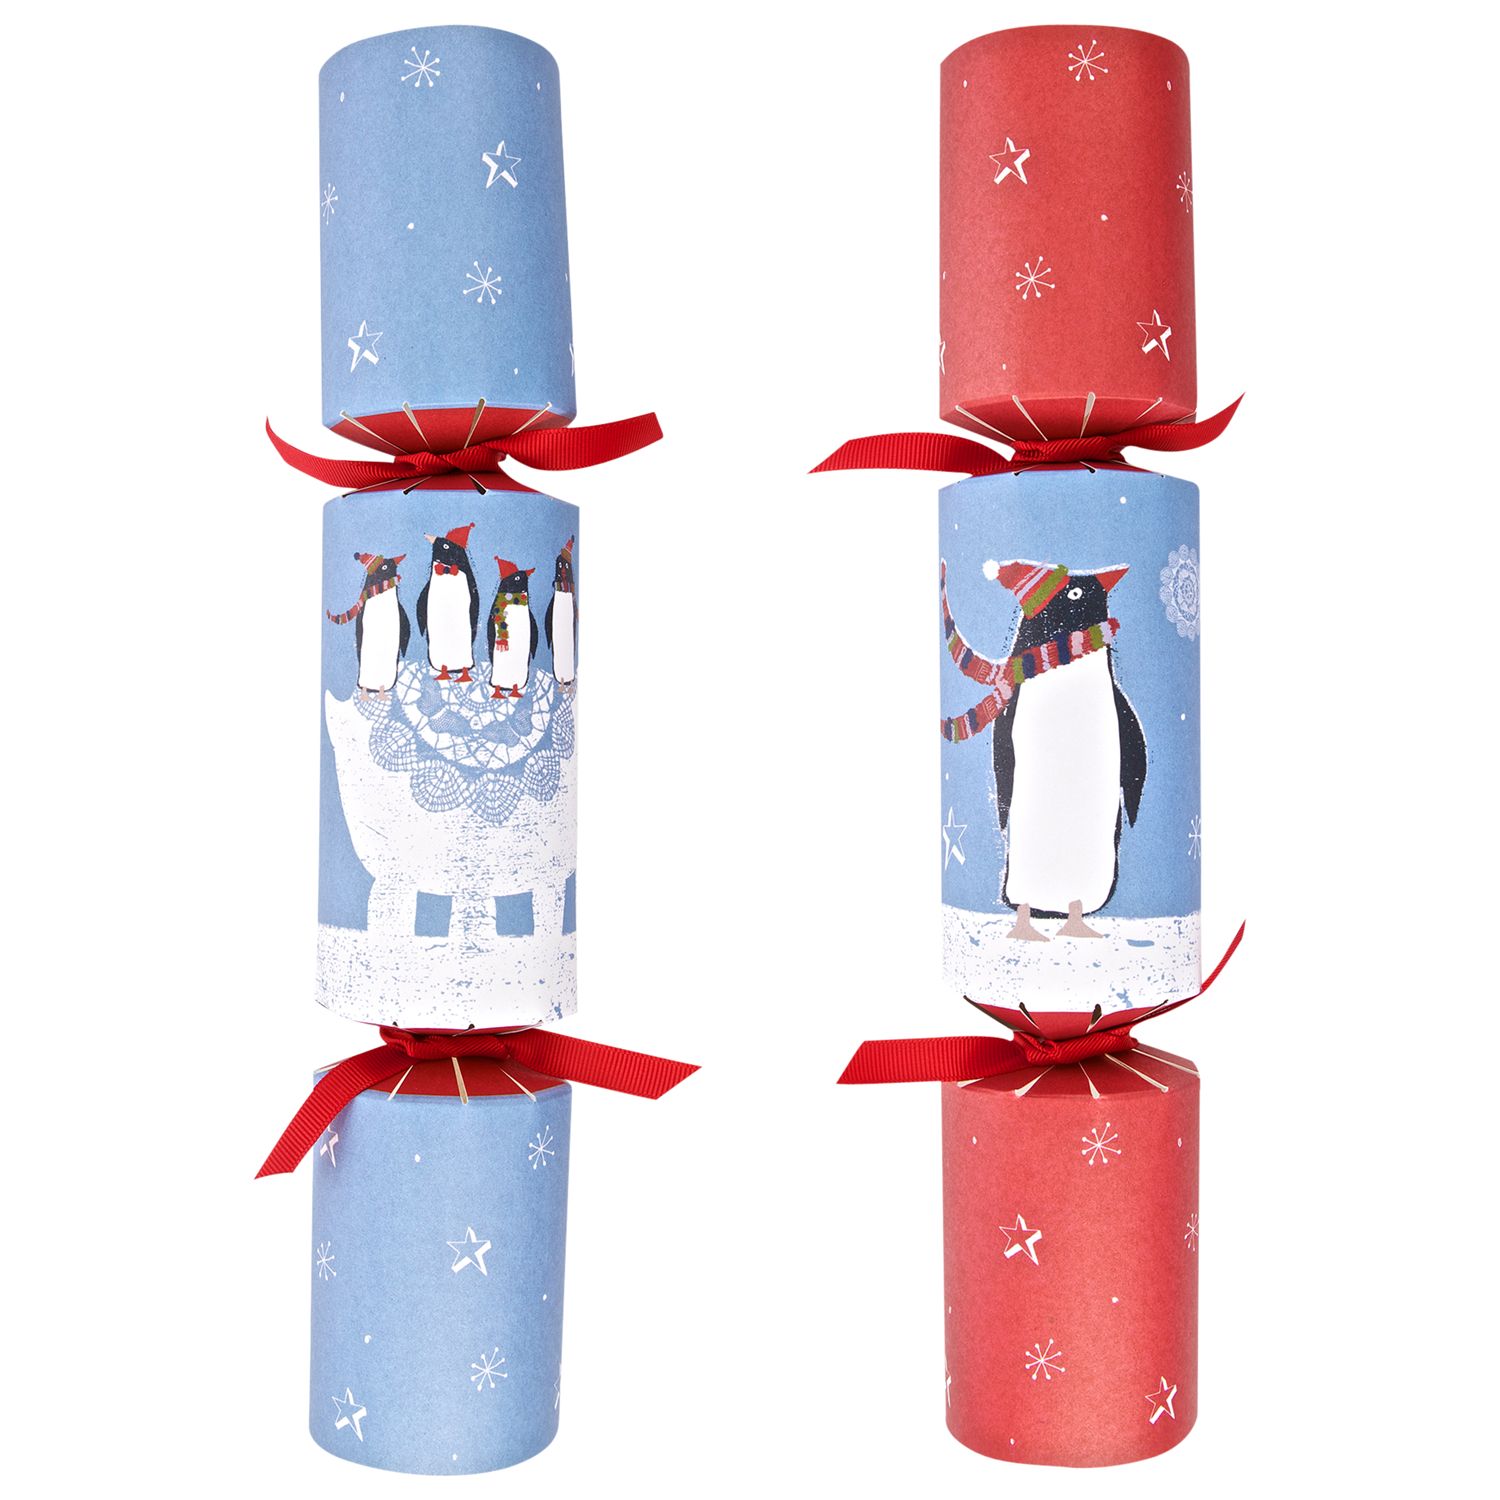 Buy John Lewis Race to the Pole Game Crackers, Pack of 6 Online at johnlewis.com